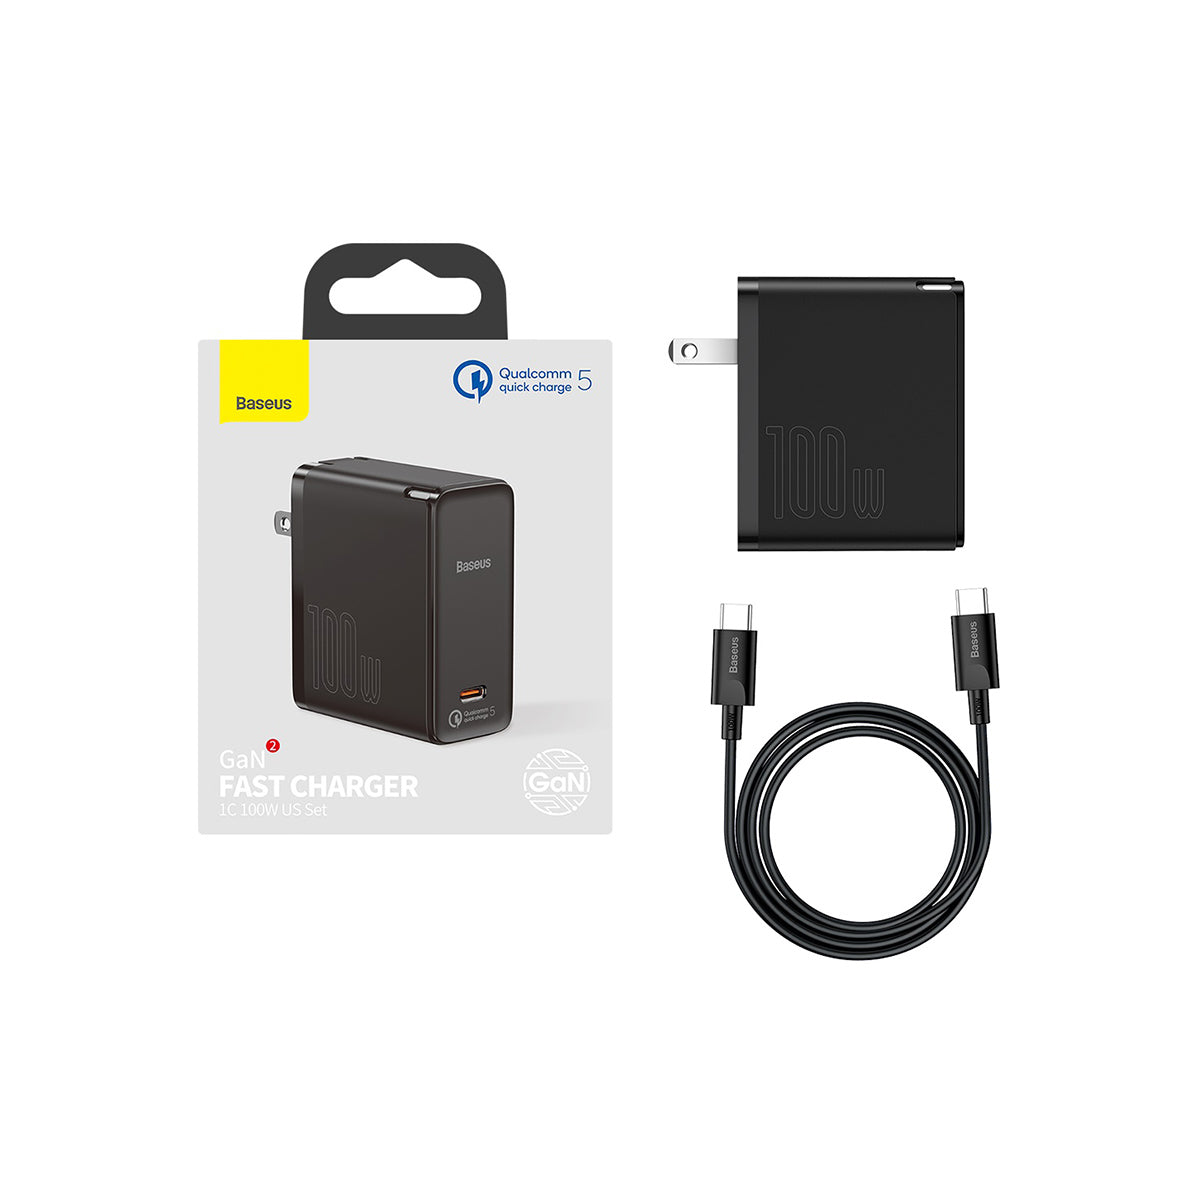 baseus_gan2_usb_c_fast_charger_100w_package